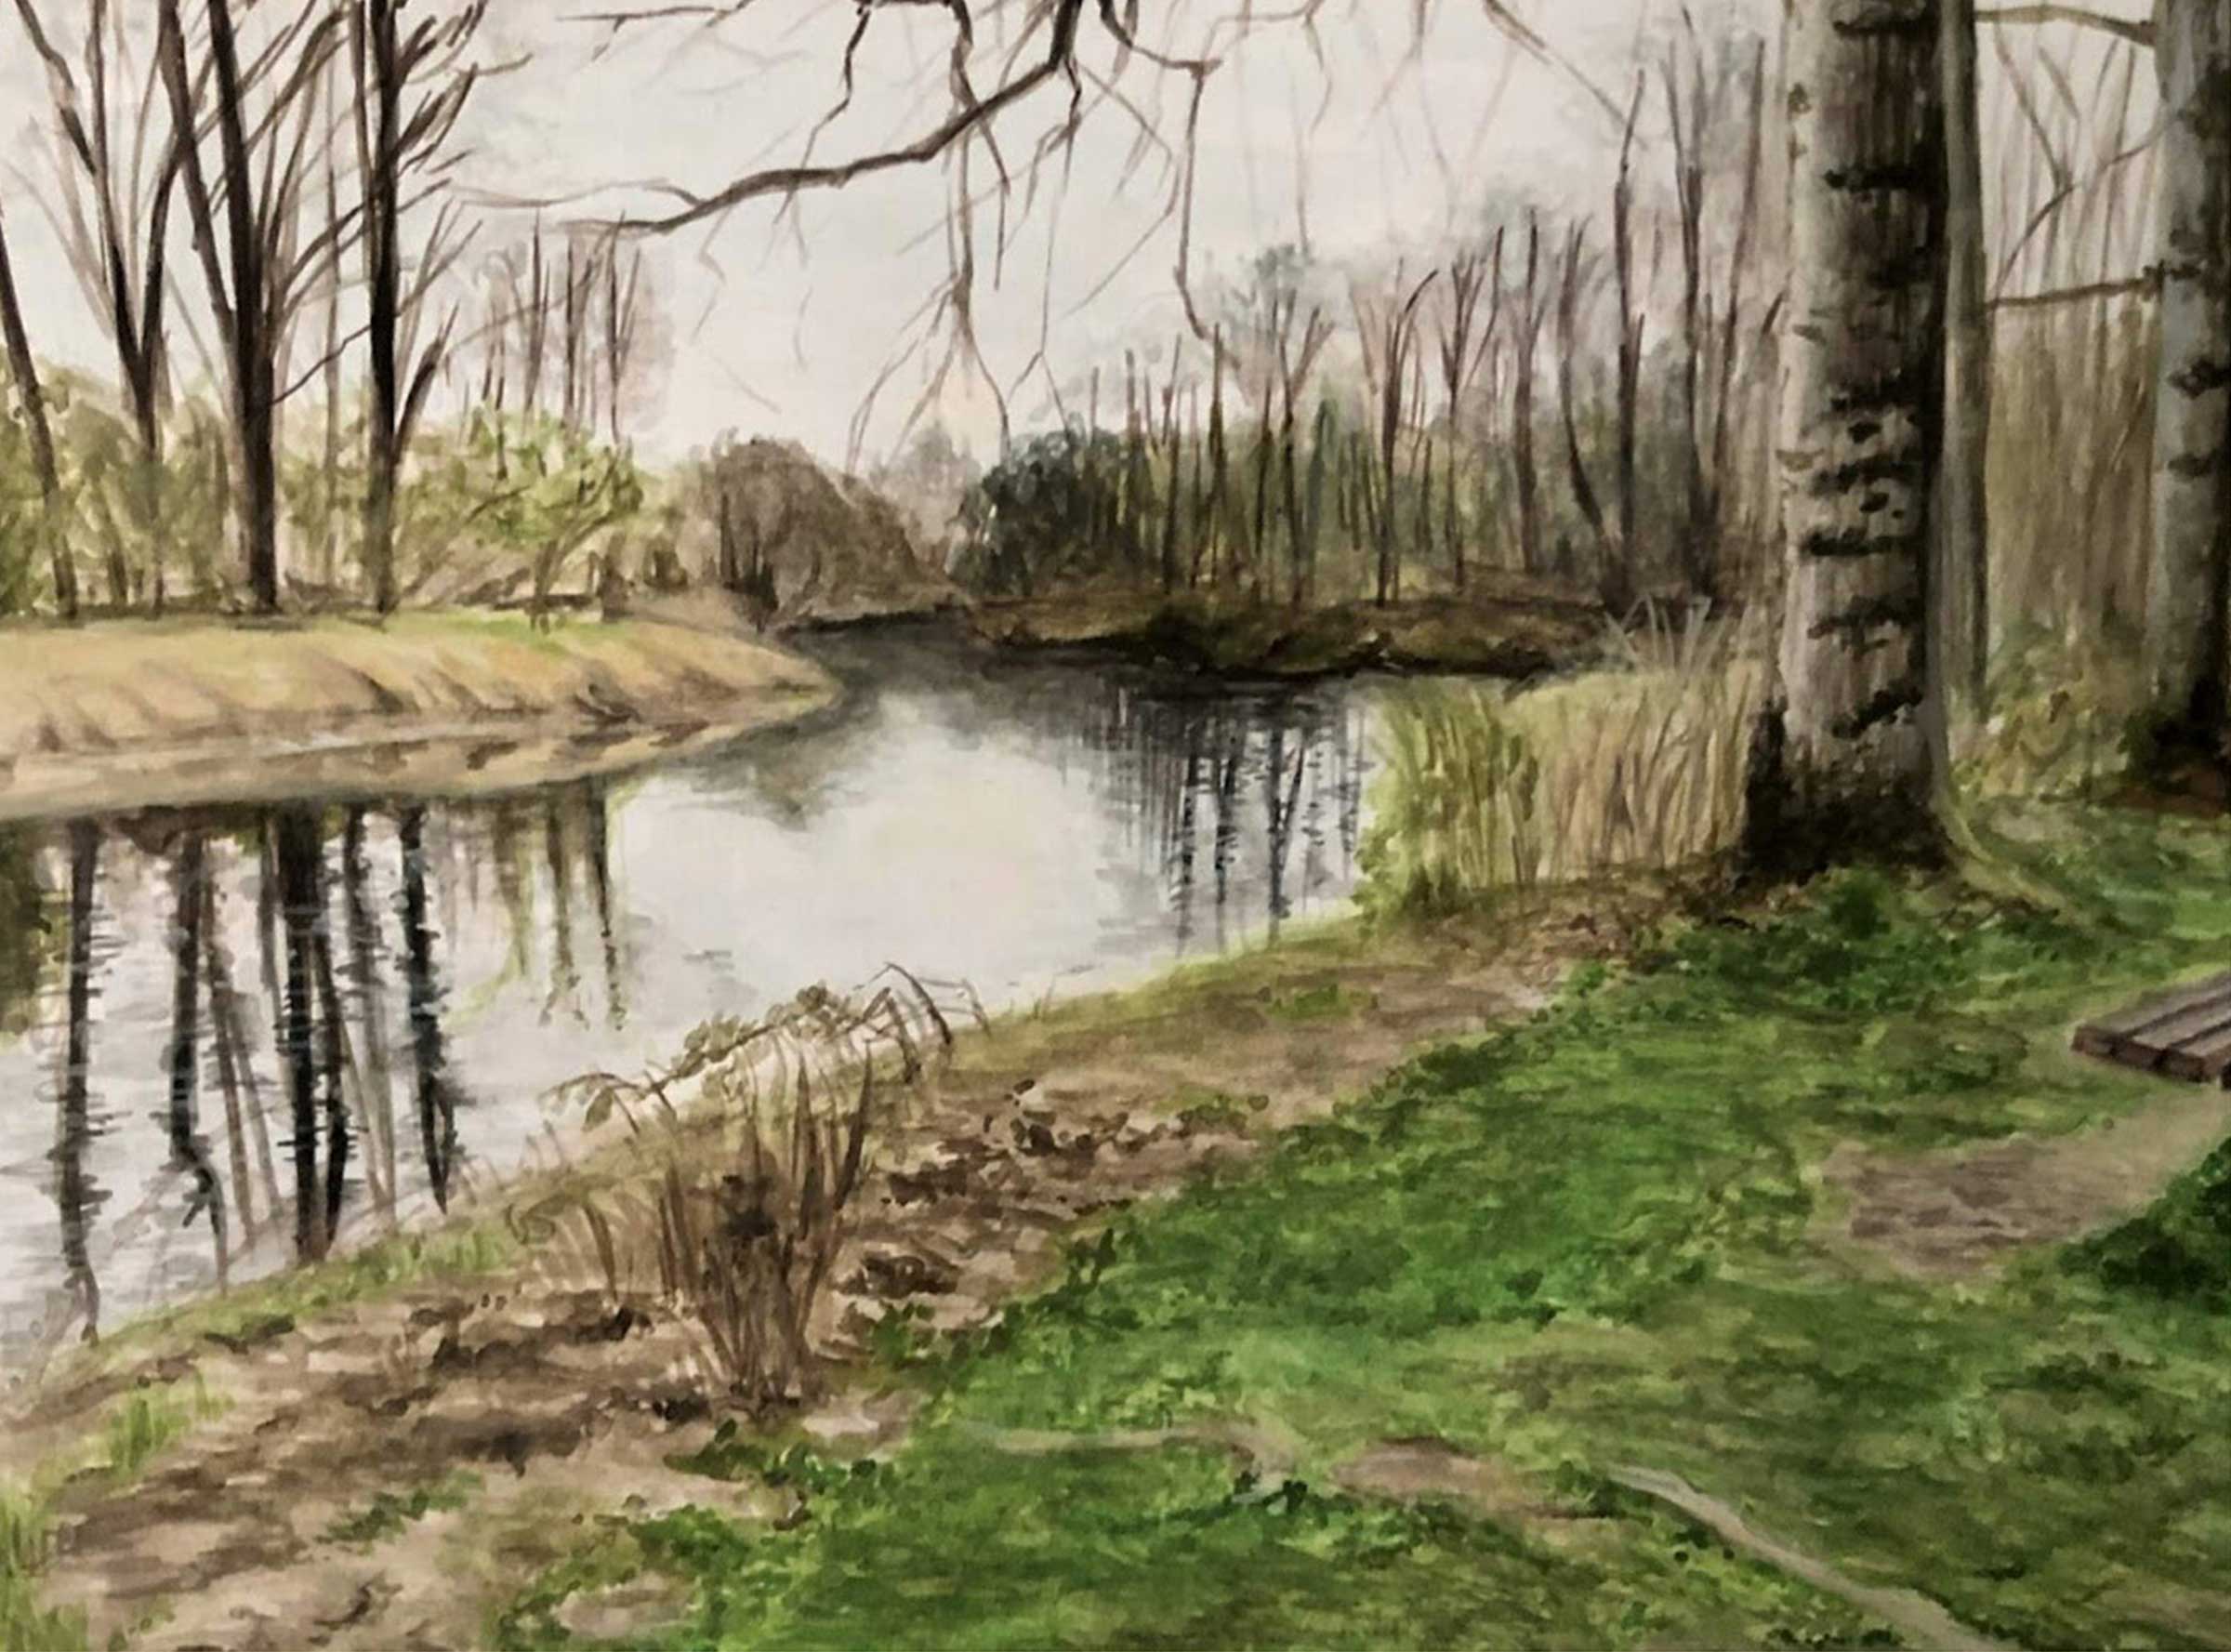 A painting of a river in a forested area.